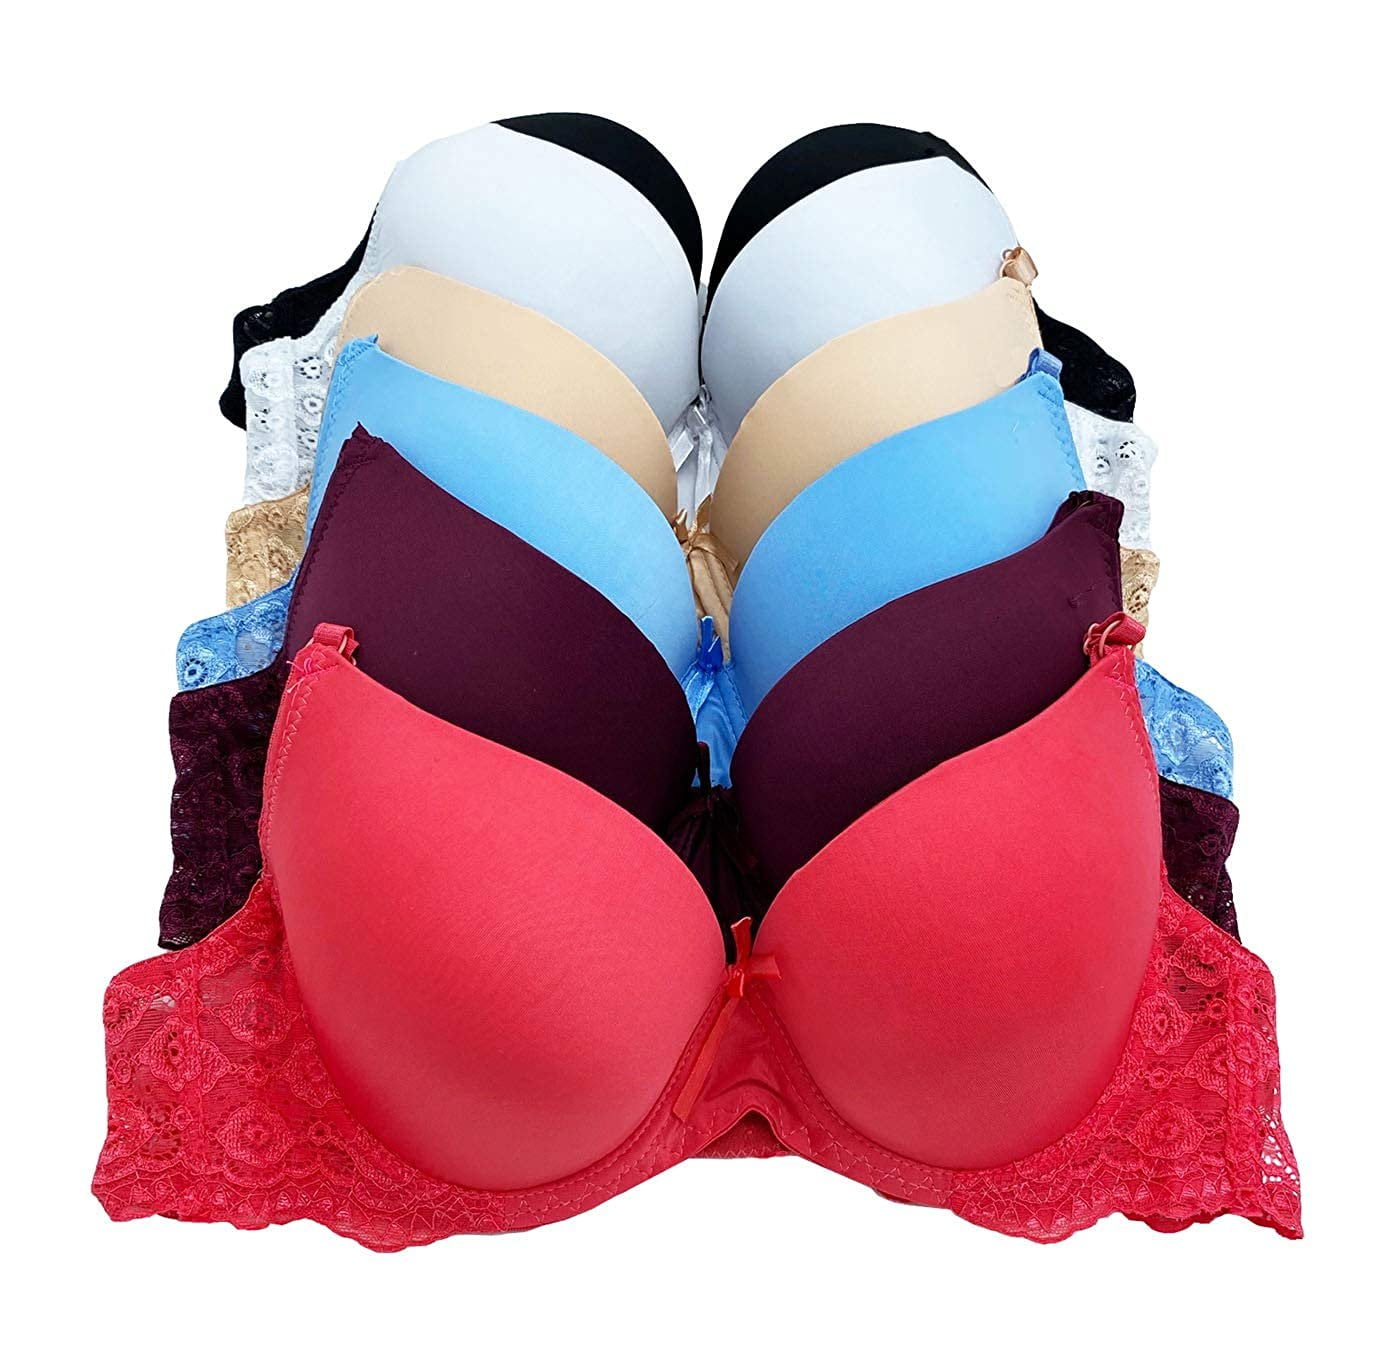 Just Intimates B40023-34C Women's Bras (Pack of 6) at